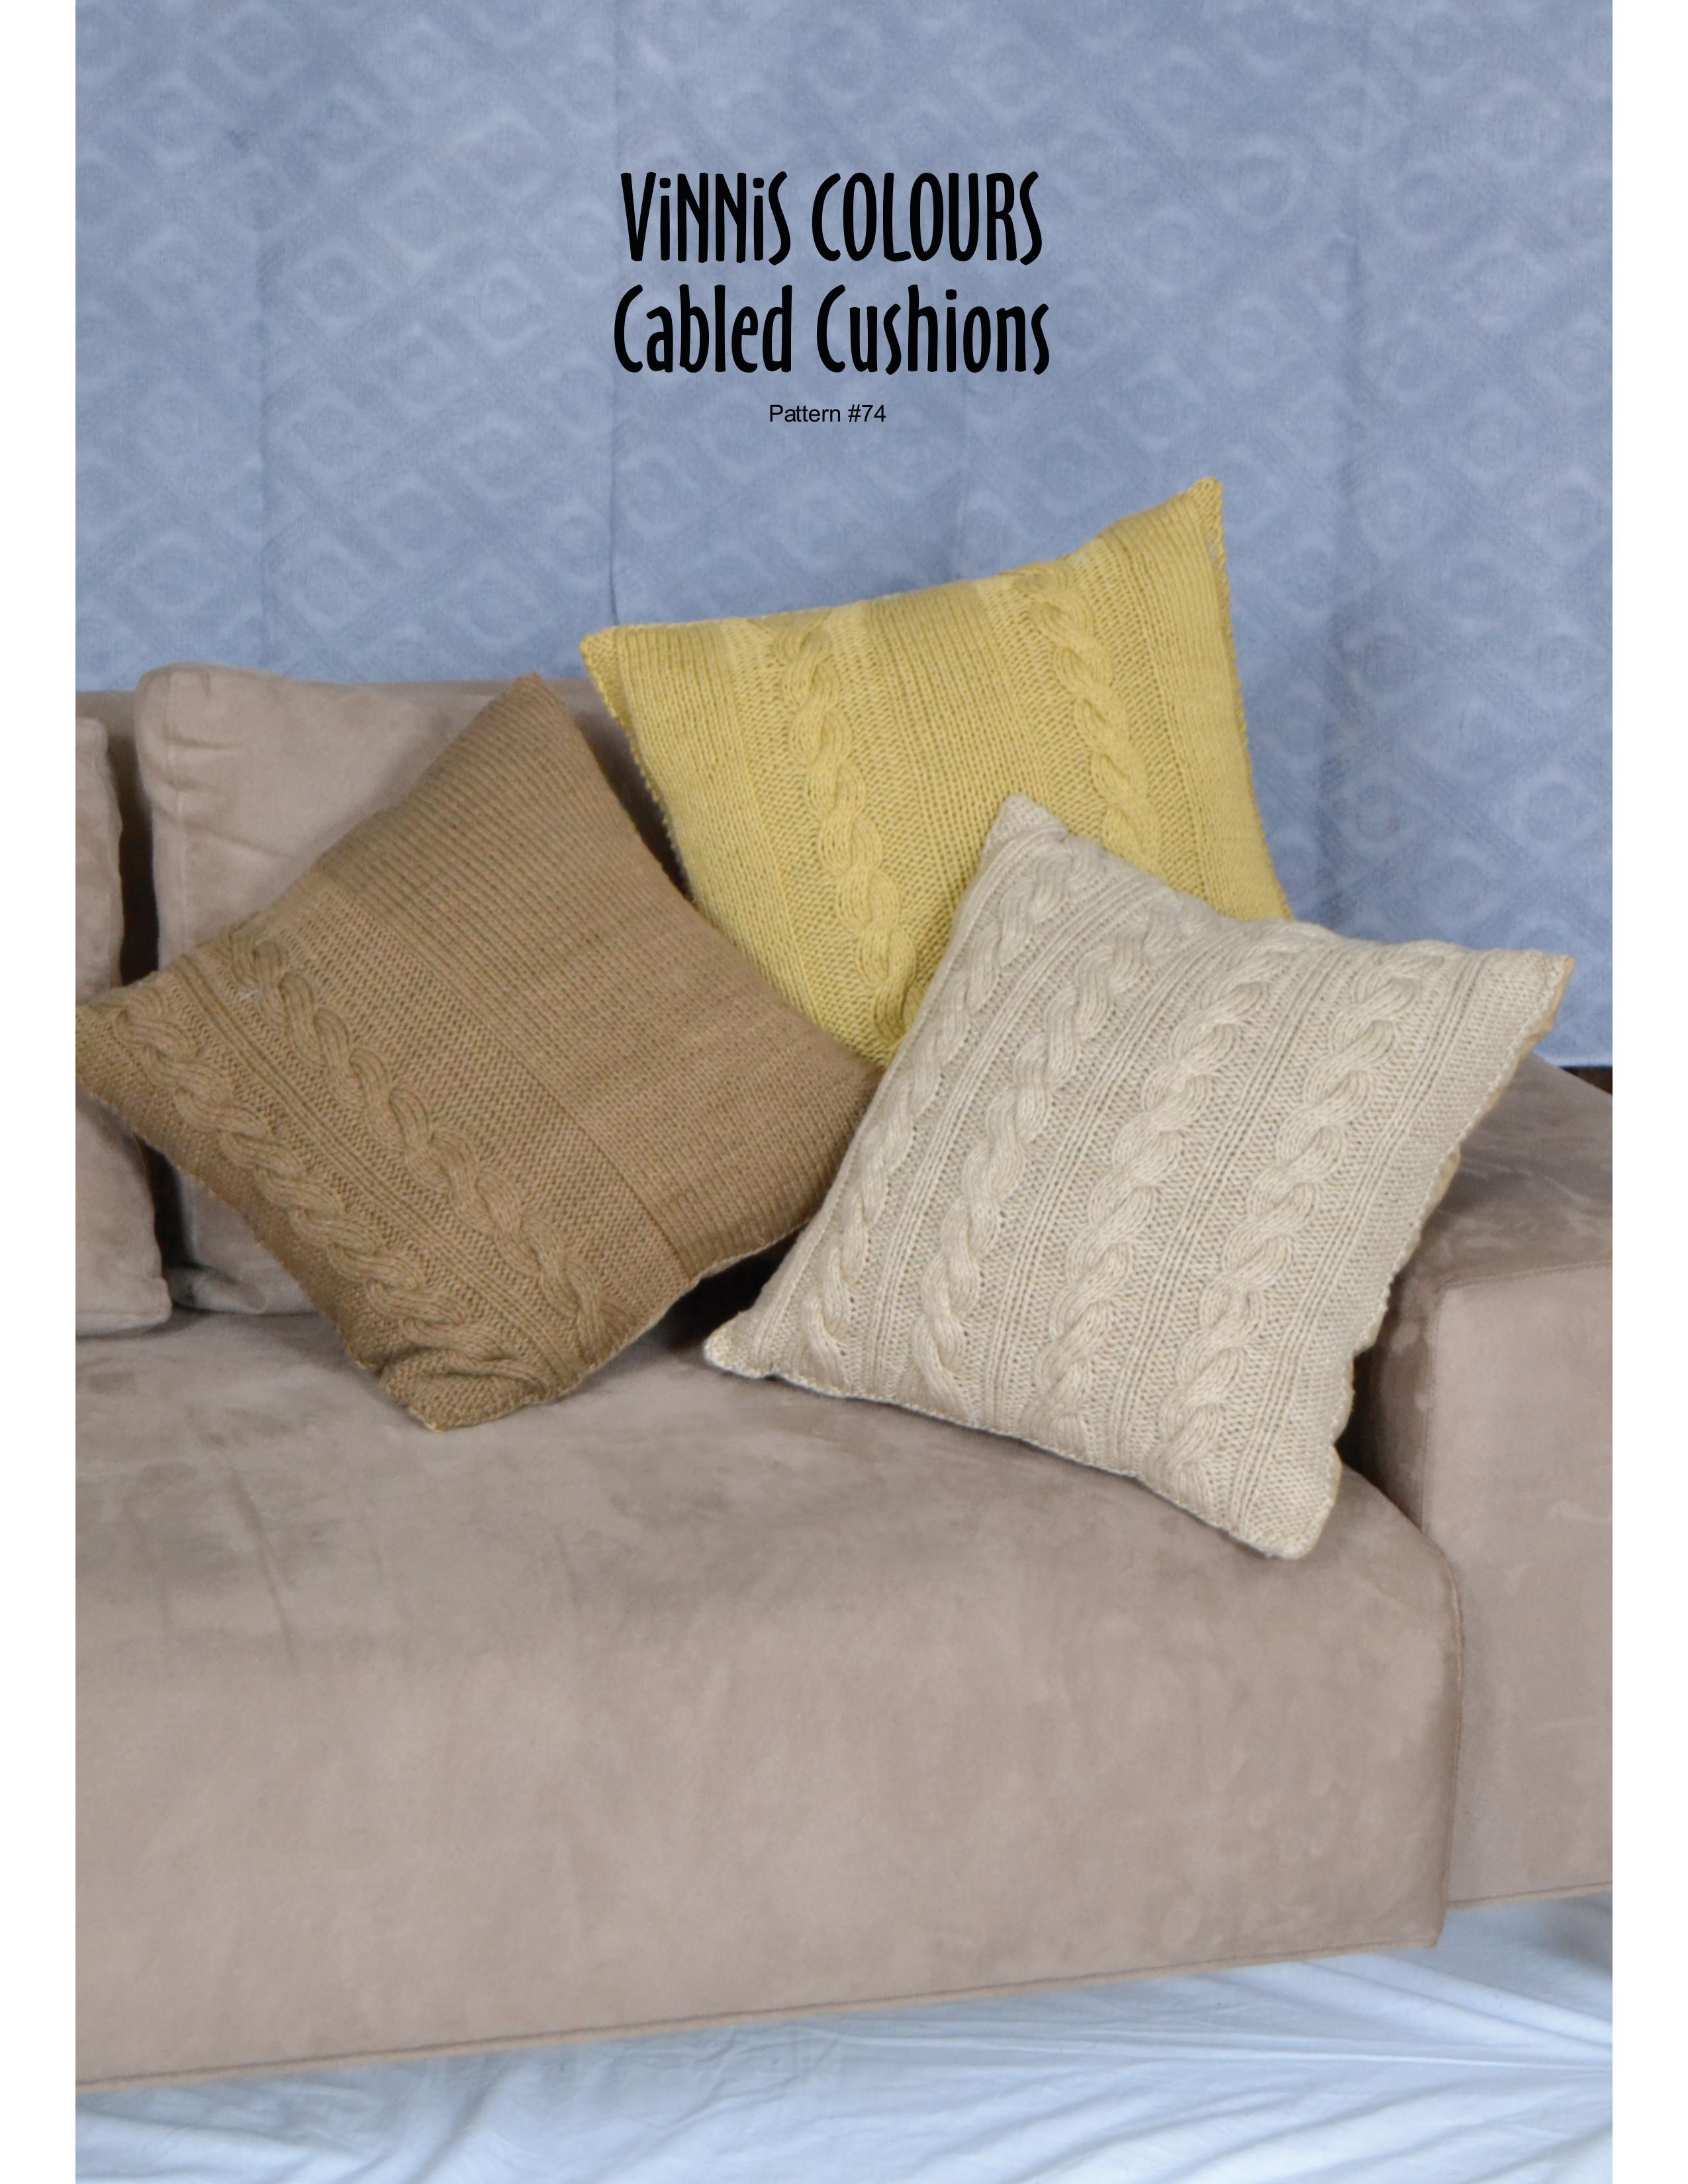 VCDL - P074 - Cabled Cushions